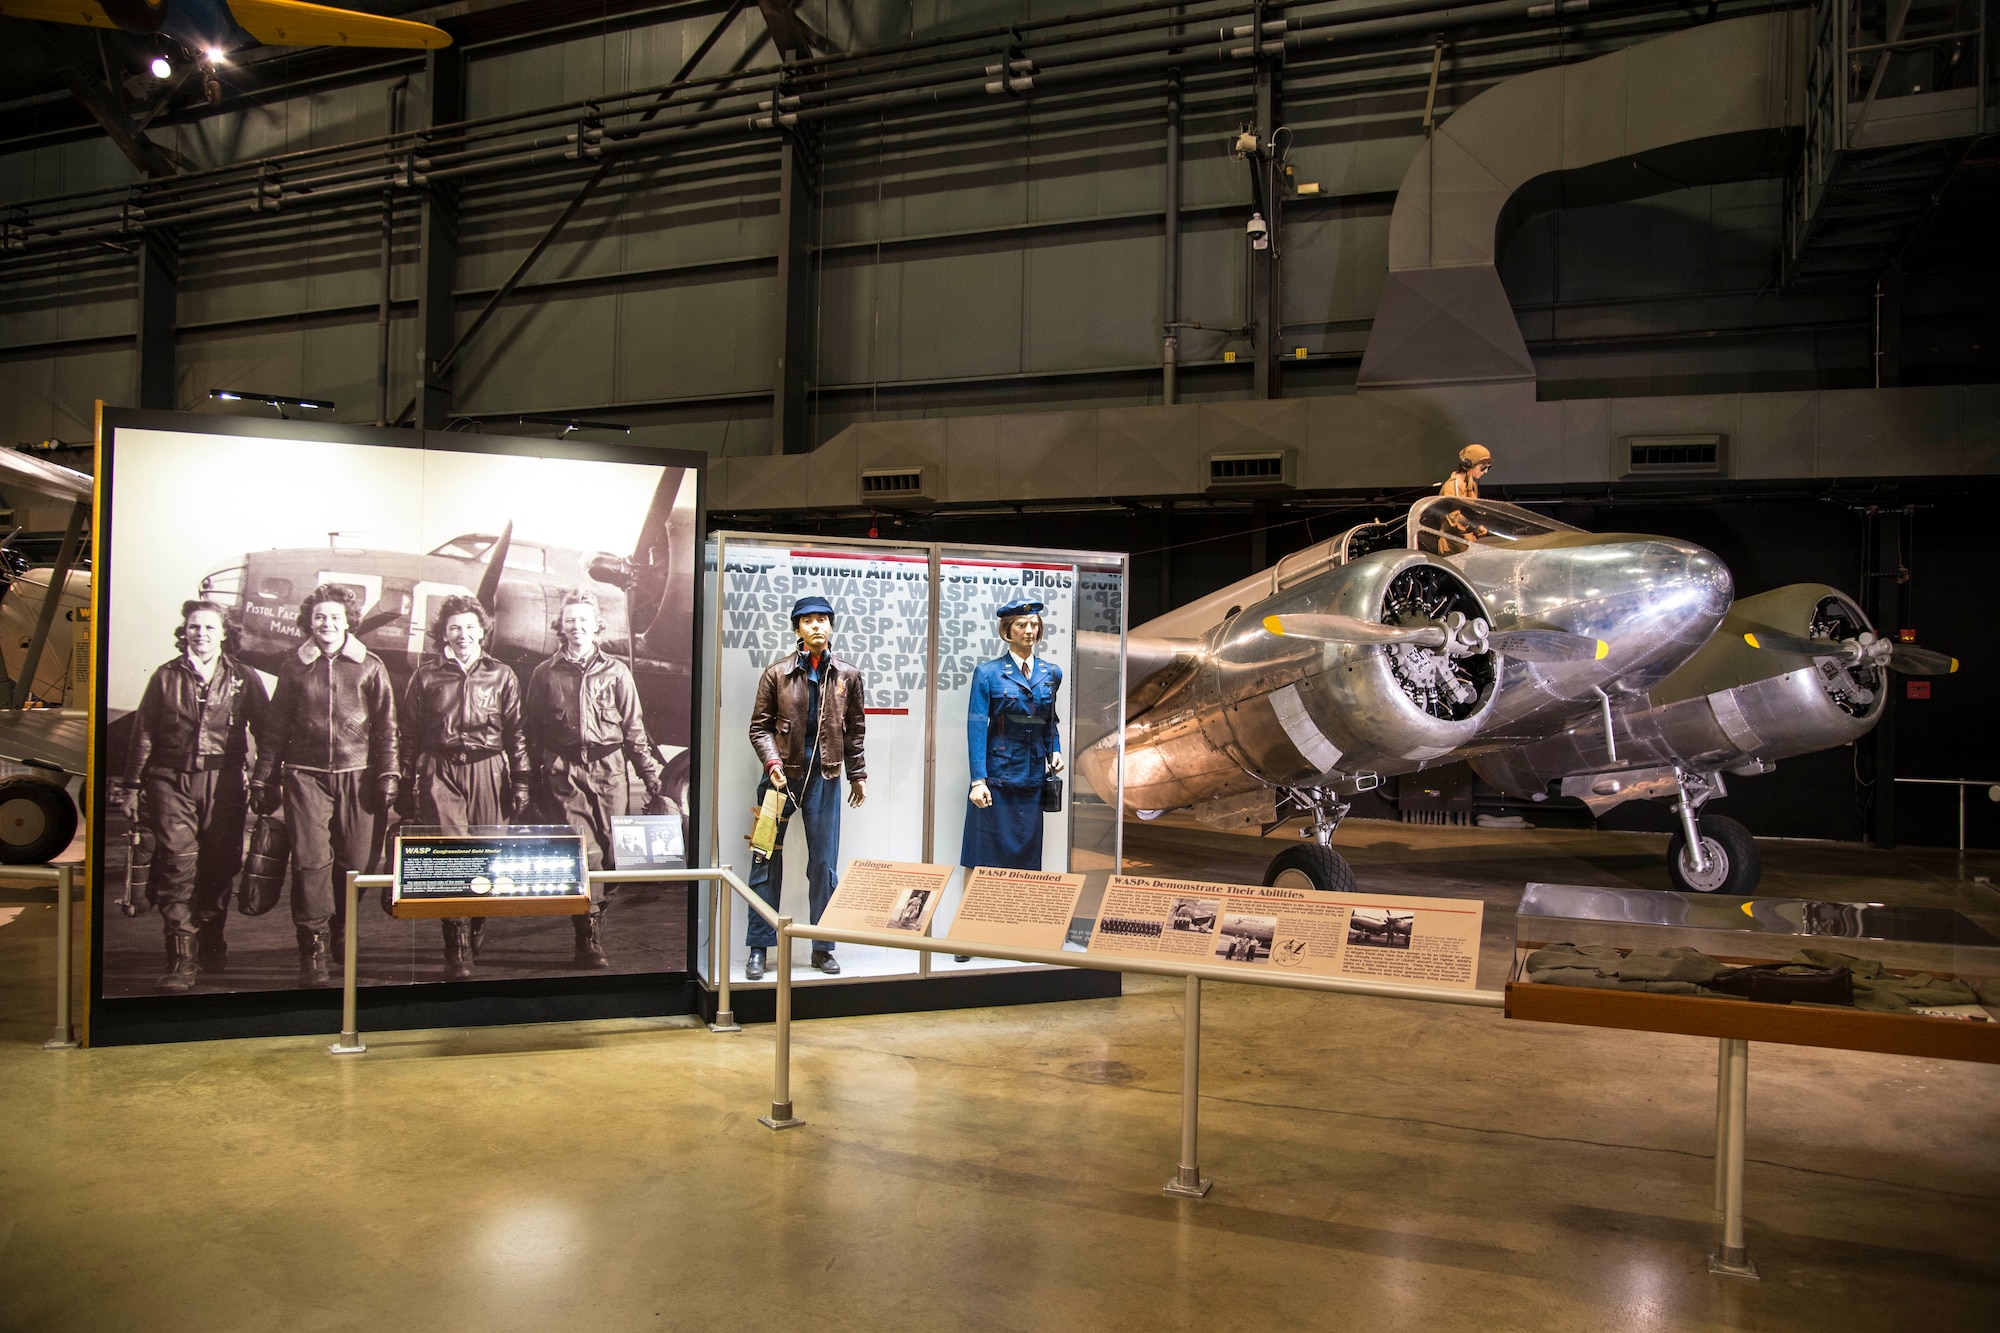 DAYTON, Ohio -- Women Airforce Service Pilots (WASP) Exhibit in the WWII Gallery at the National Museum of the U.S. Air Force. (U.S. Air Force photo by Ken LaRock)